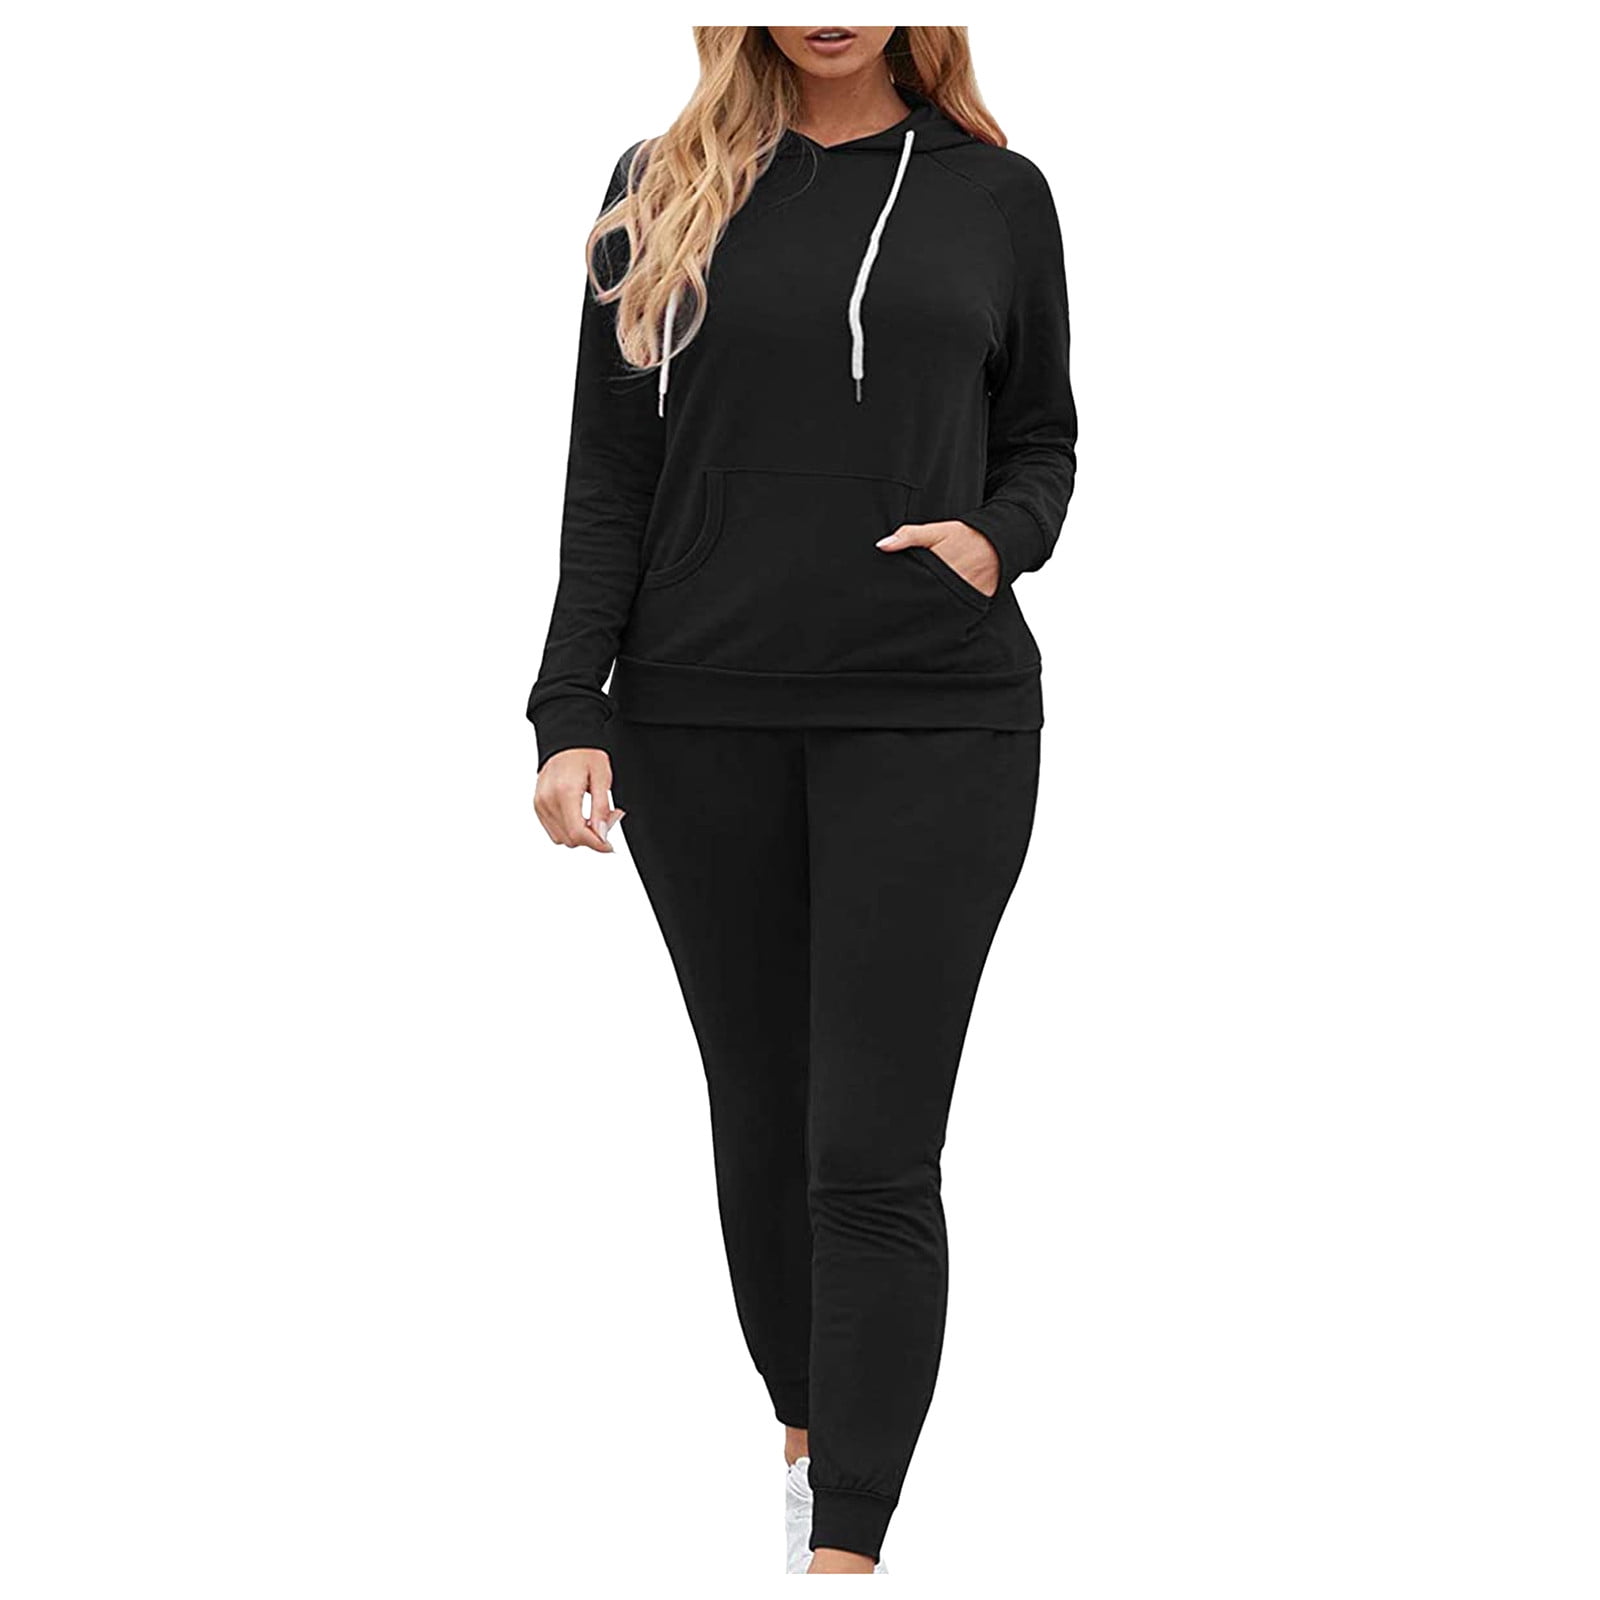 Ladies Hooded Pocket Sports Sweatshirt Set Women 2 Piece Outfits Casual  Sweatsuit Pullover Hoodie Sweatpants Sport Outfits Long Sleeve Shirts for  Women Reduced Price and Clearance Sale - Walmart.com